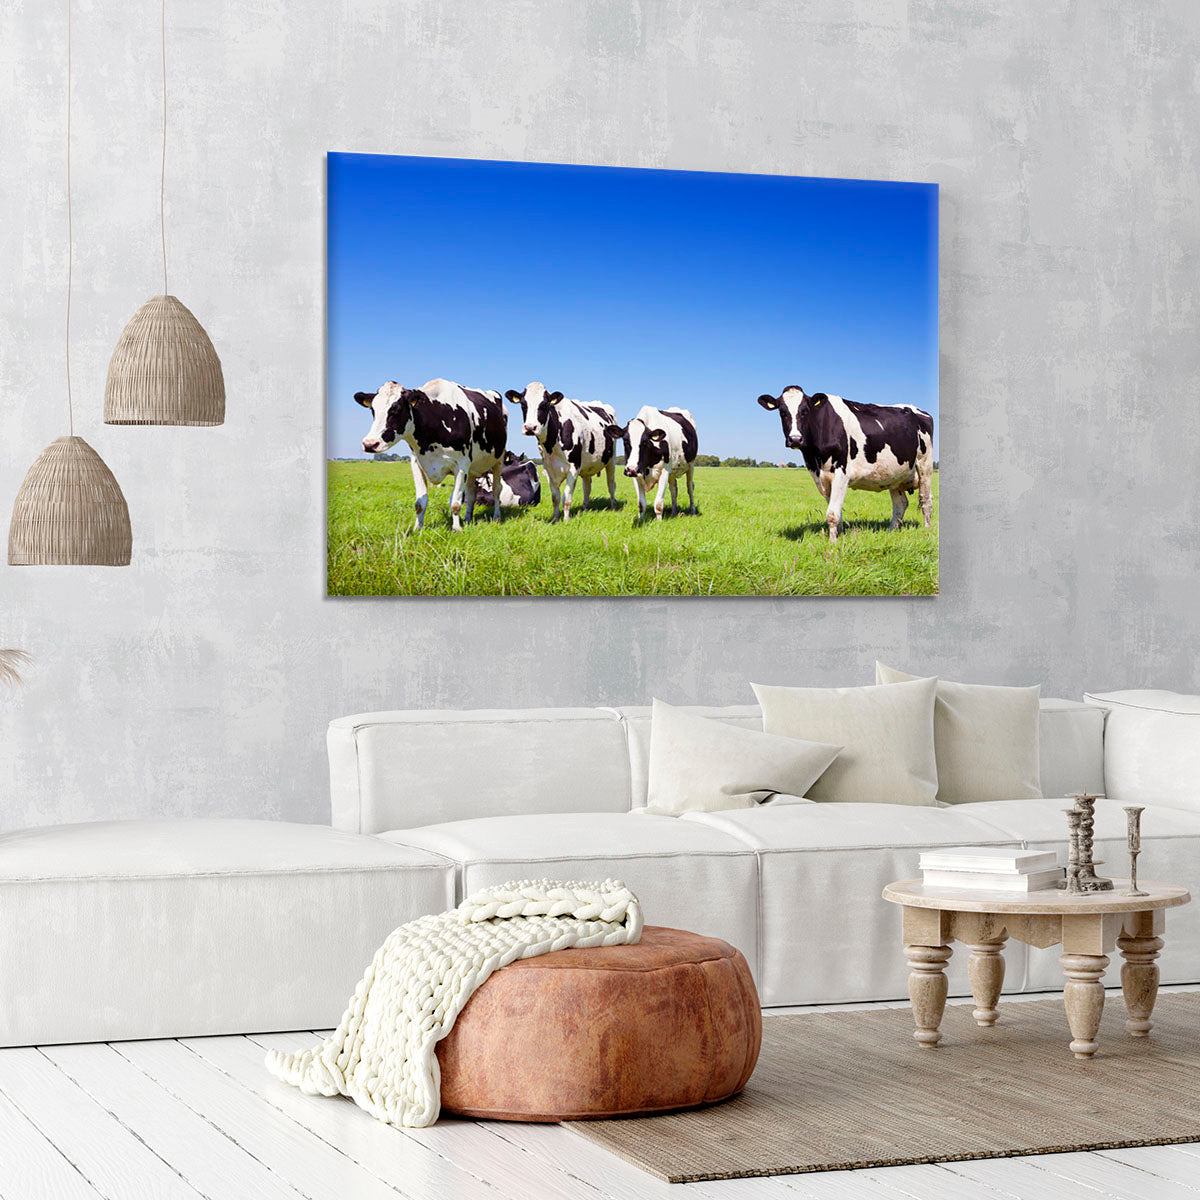 Black and white cows in a grassy field Canvas Print or Poster - Canvas Art Rocks - 6